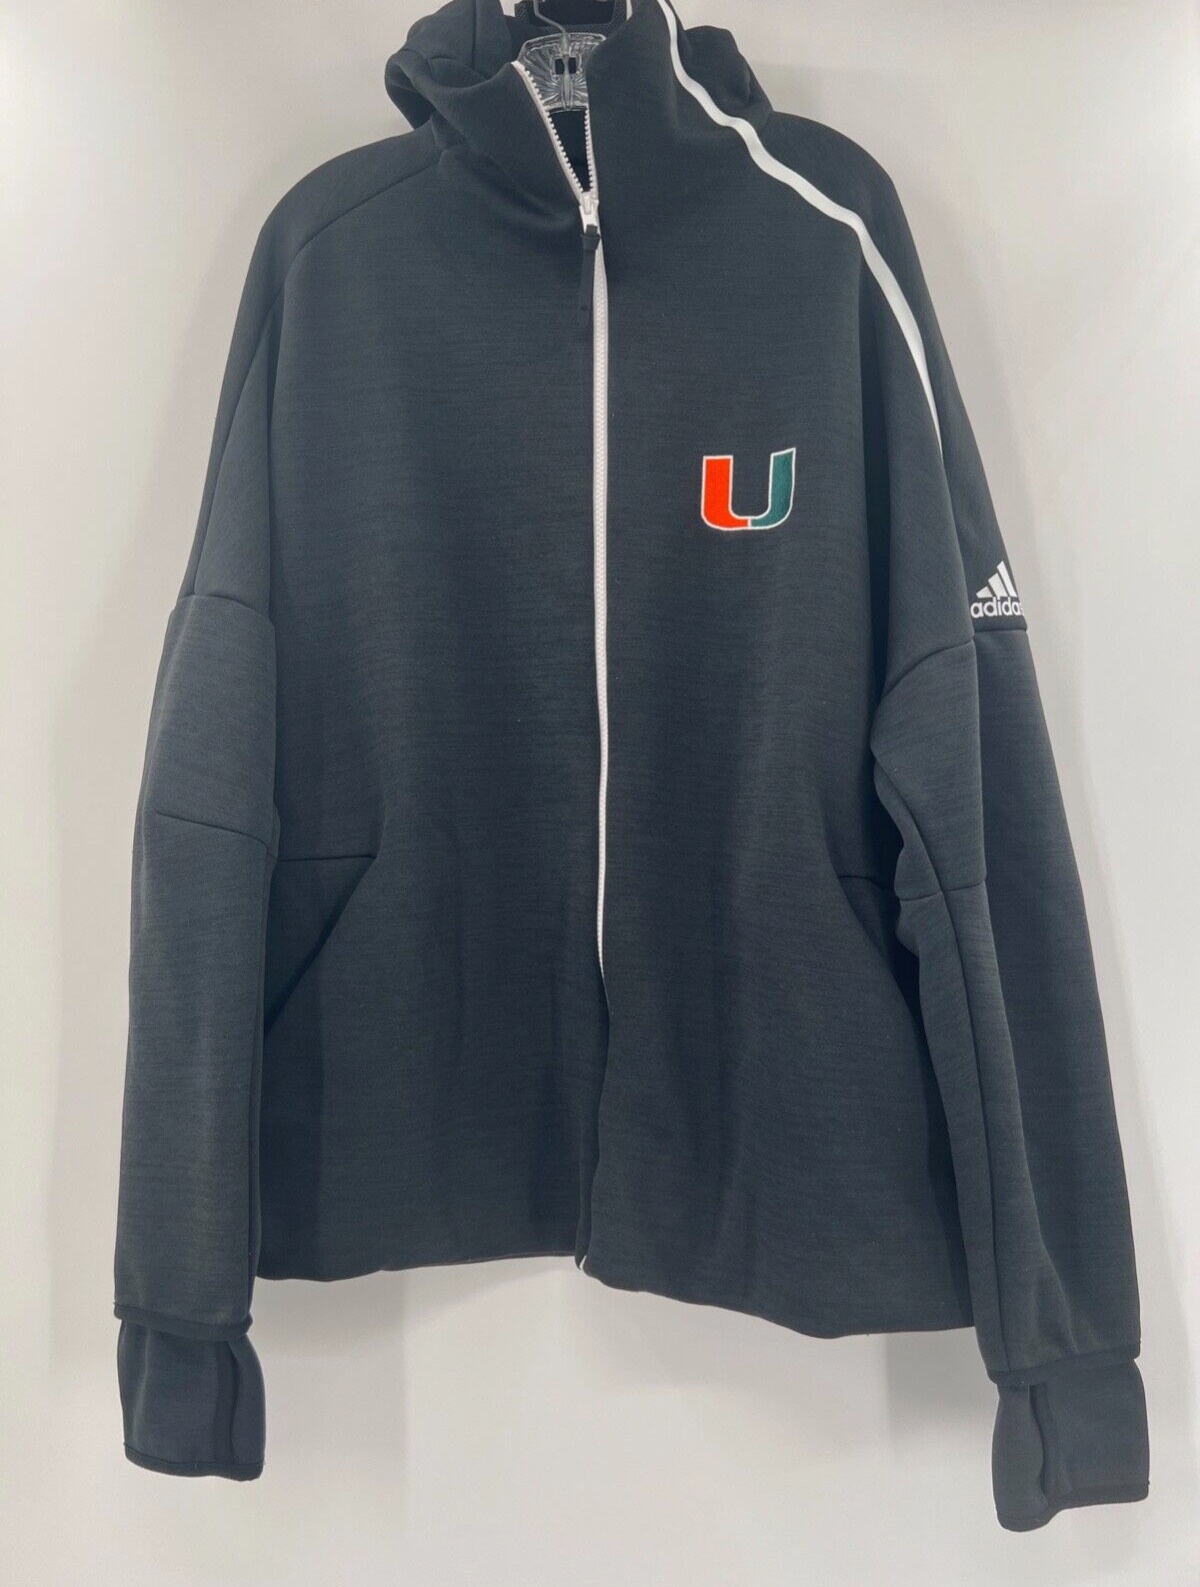 Miami Hurricanes Game Used Black Adidas Full Zip Sweater With Pockets Sz Unknown